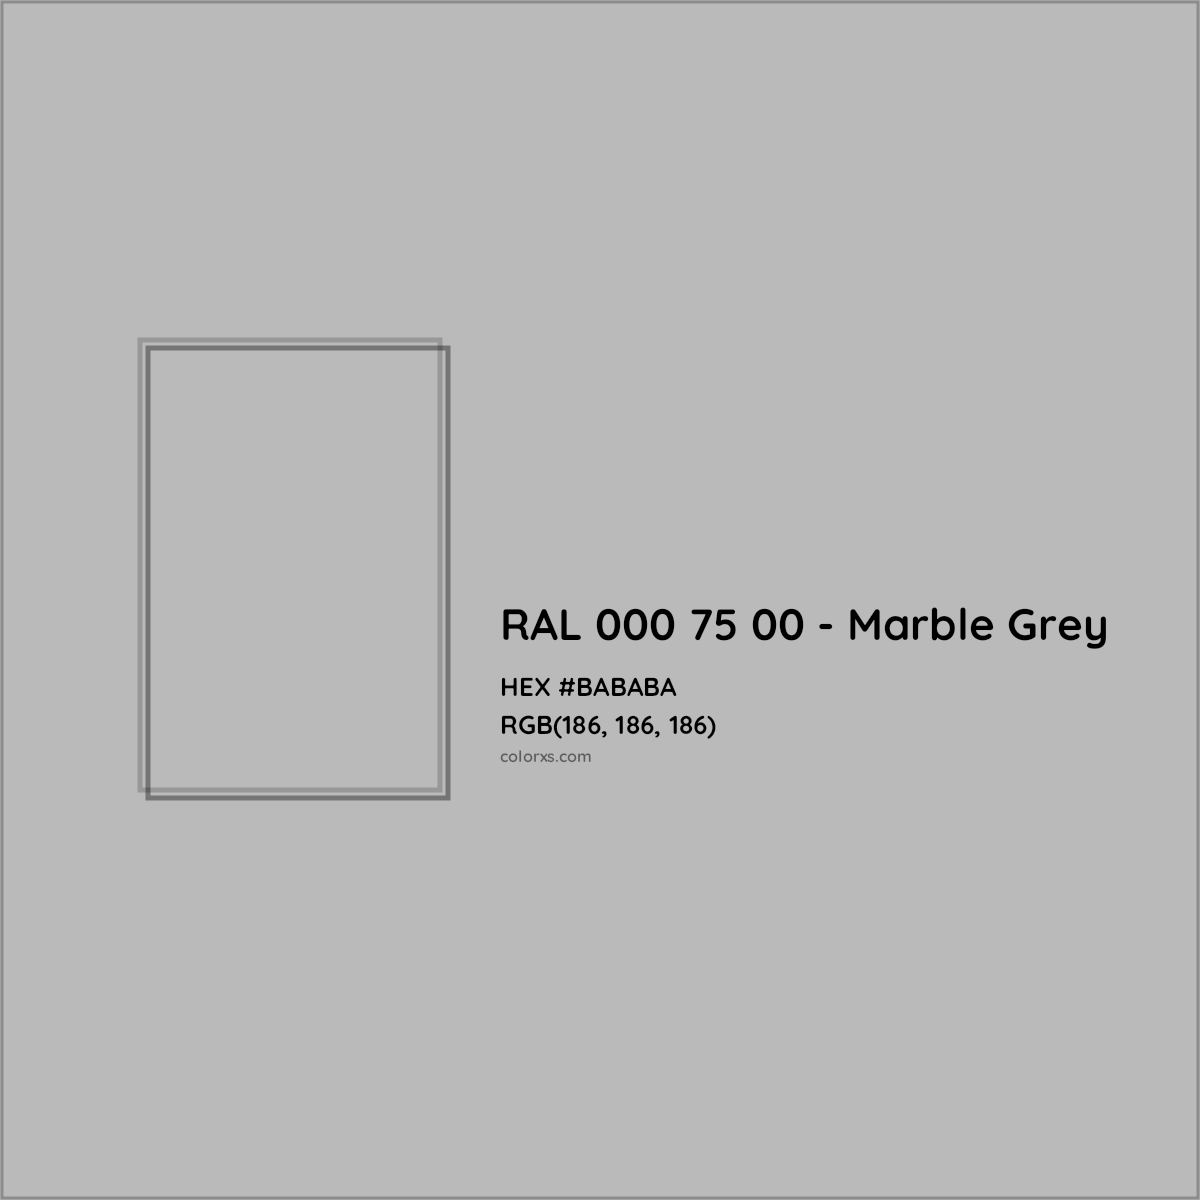 HEX #BABABA RAL 000 75 00 - Marble Grey CMS RAL Design - Color Code